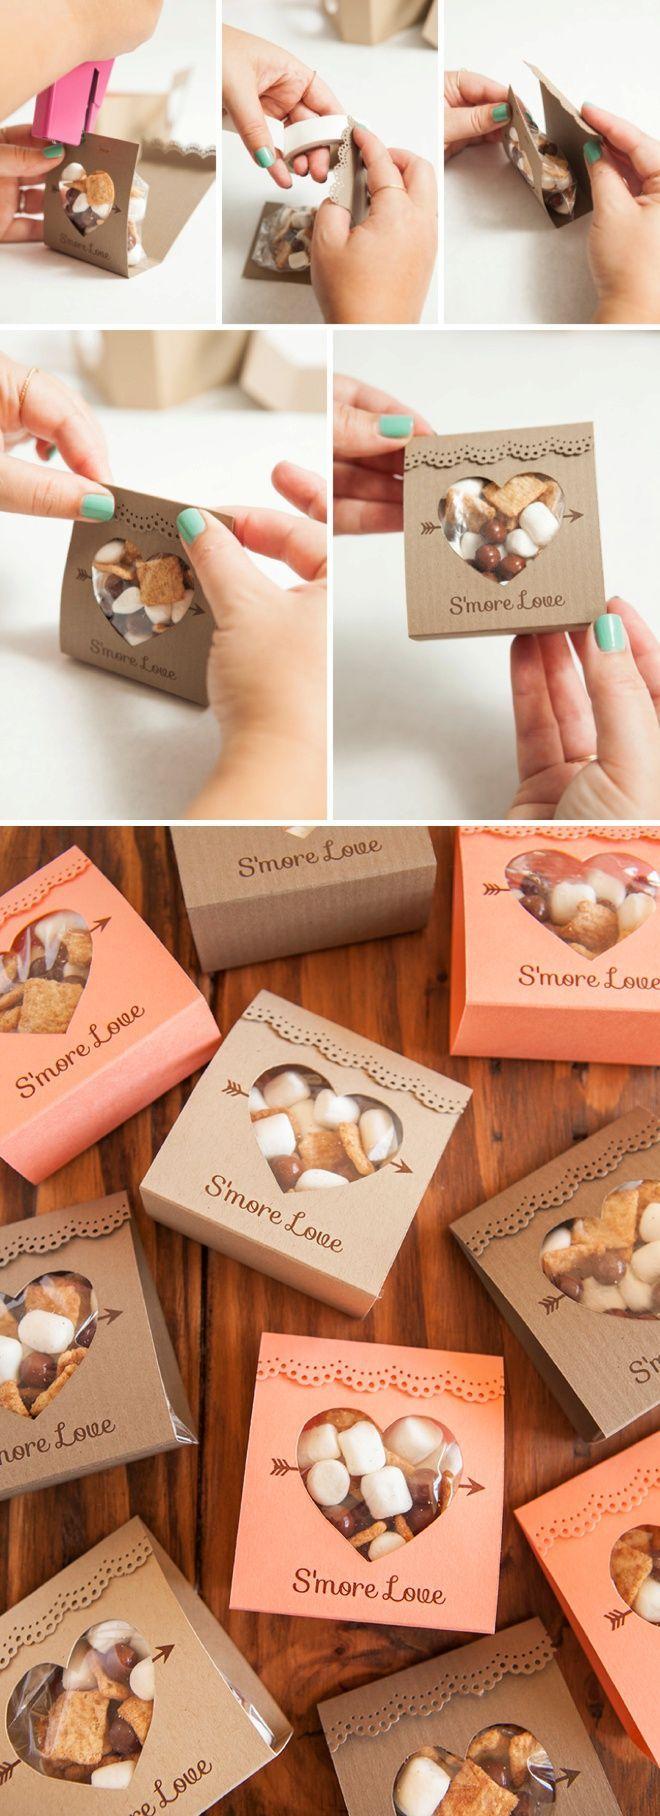 Hochzeit - How To Make These Adorable S'more Love Wedding Favors!